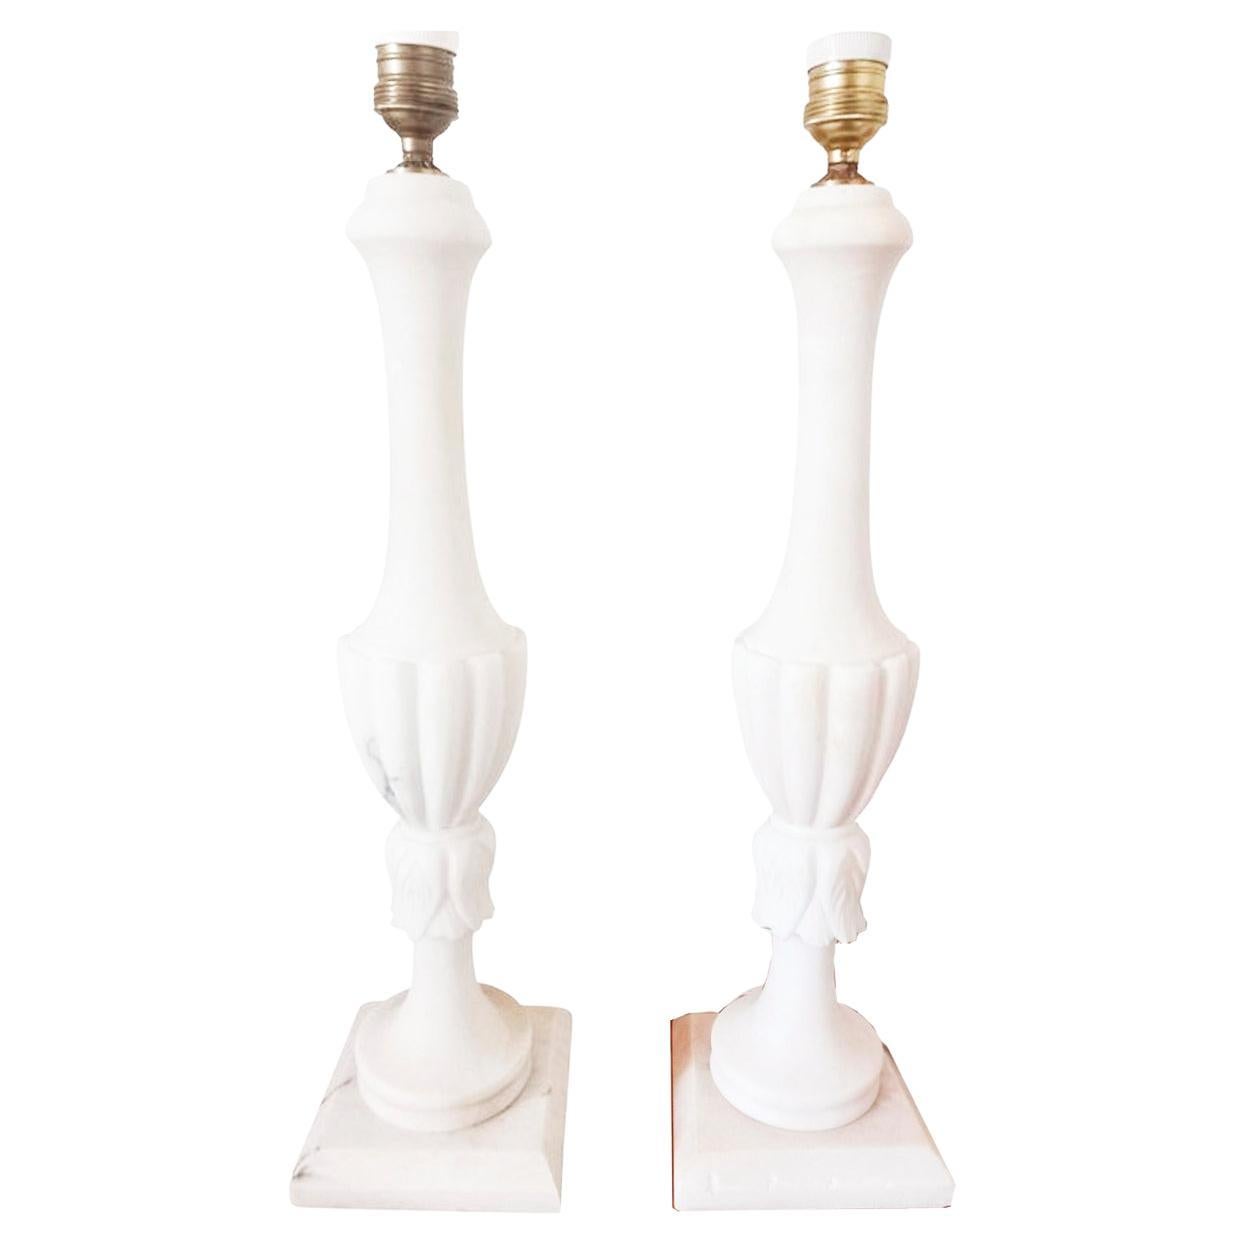  Extra Large Alabaster or Mrble Table Lamps  White Color 57 cm (without screens) For Sale